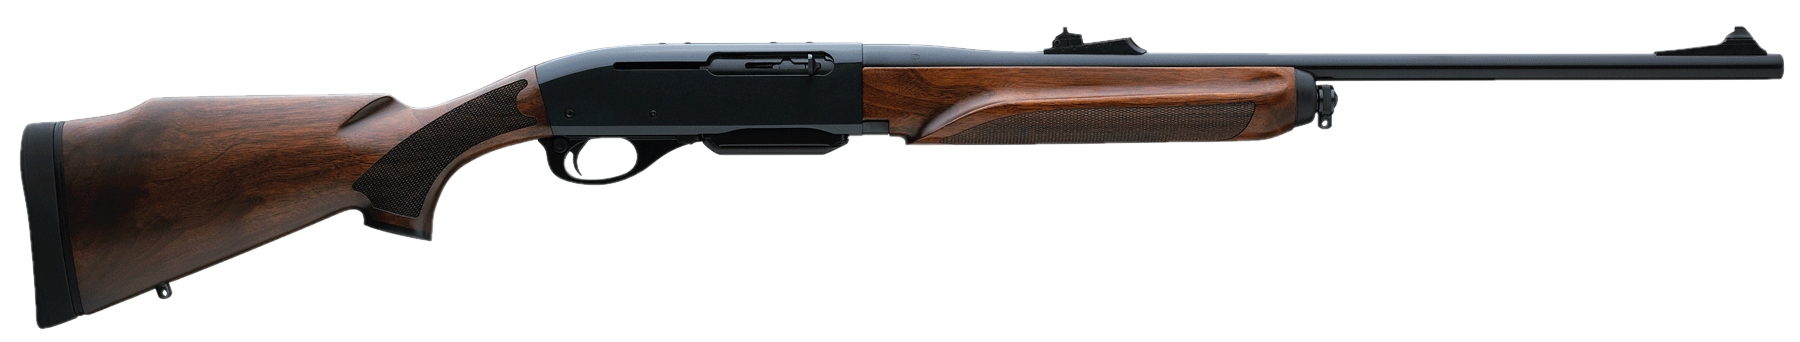 The homebrewery naturalcrit winchester. Gun clipart lever action rifle